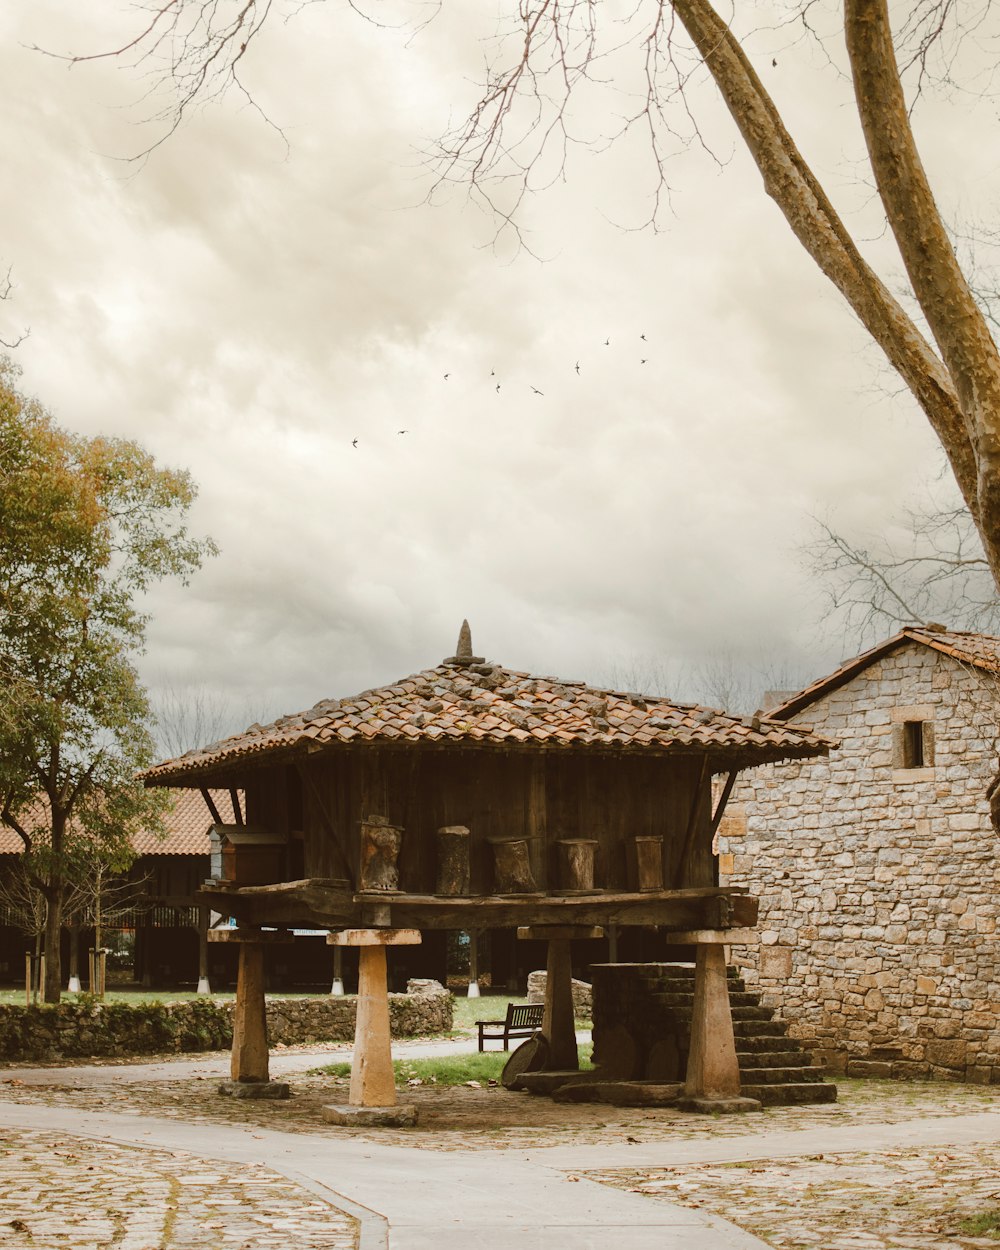 a stone building with a wooden roof next to a tree